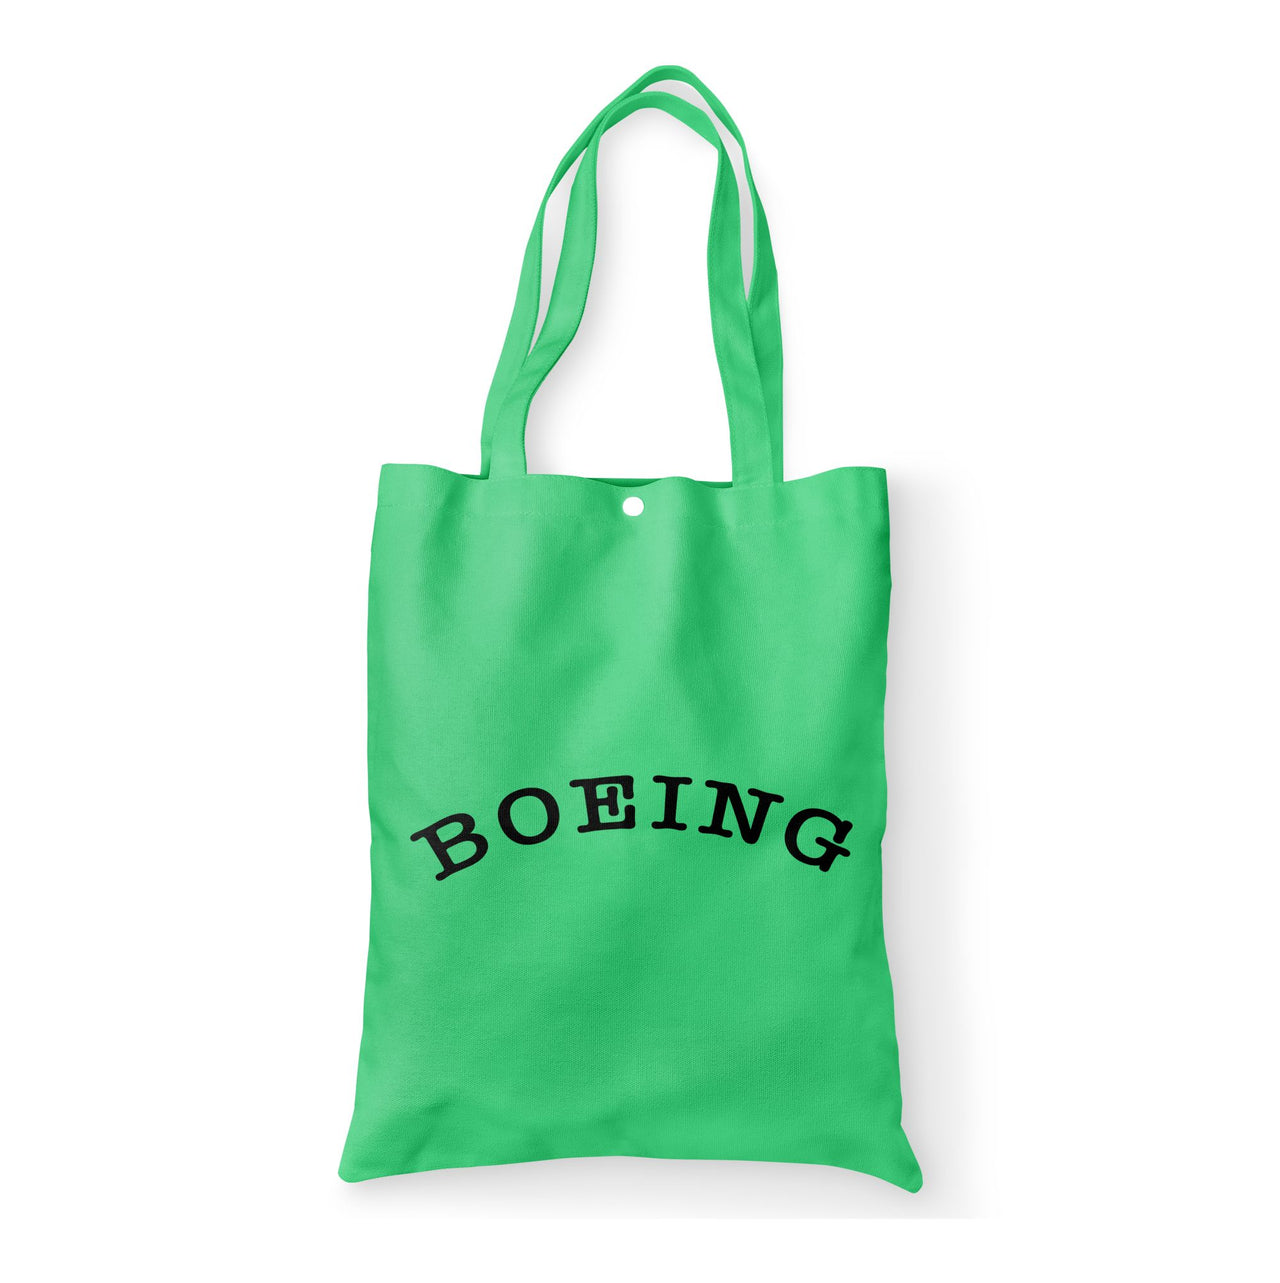 Special BOEING Text Designed Tote Bags